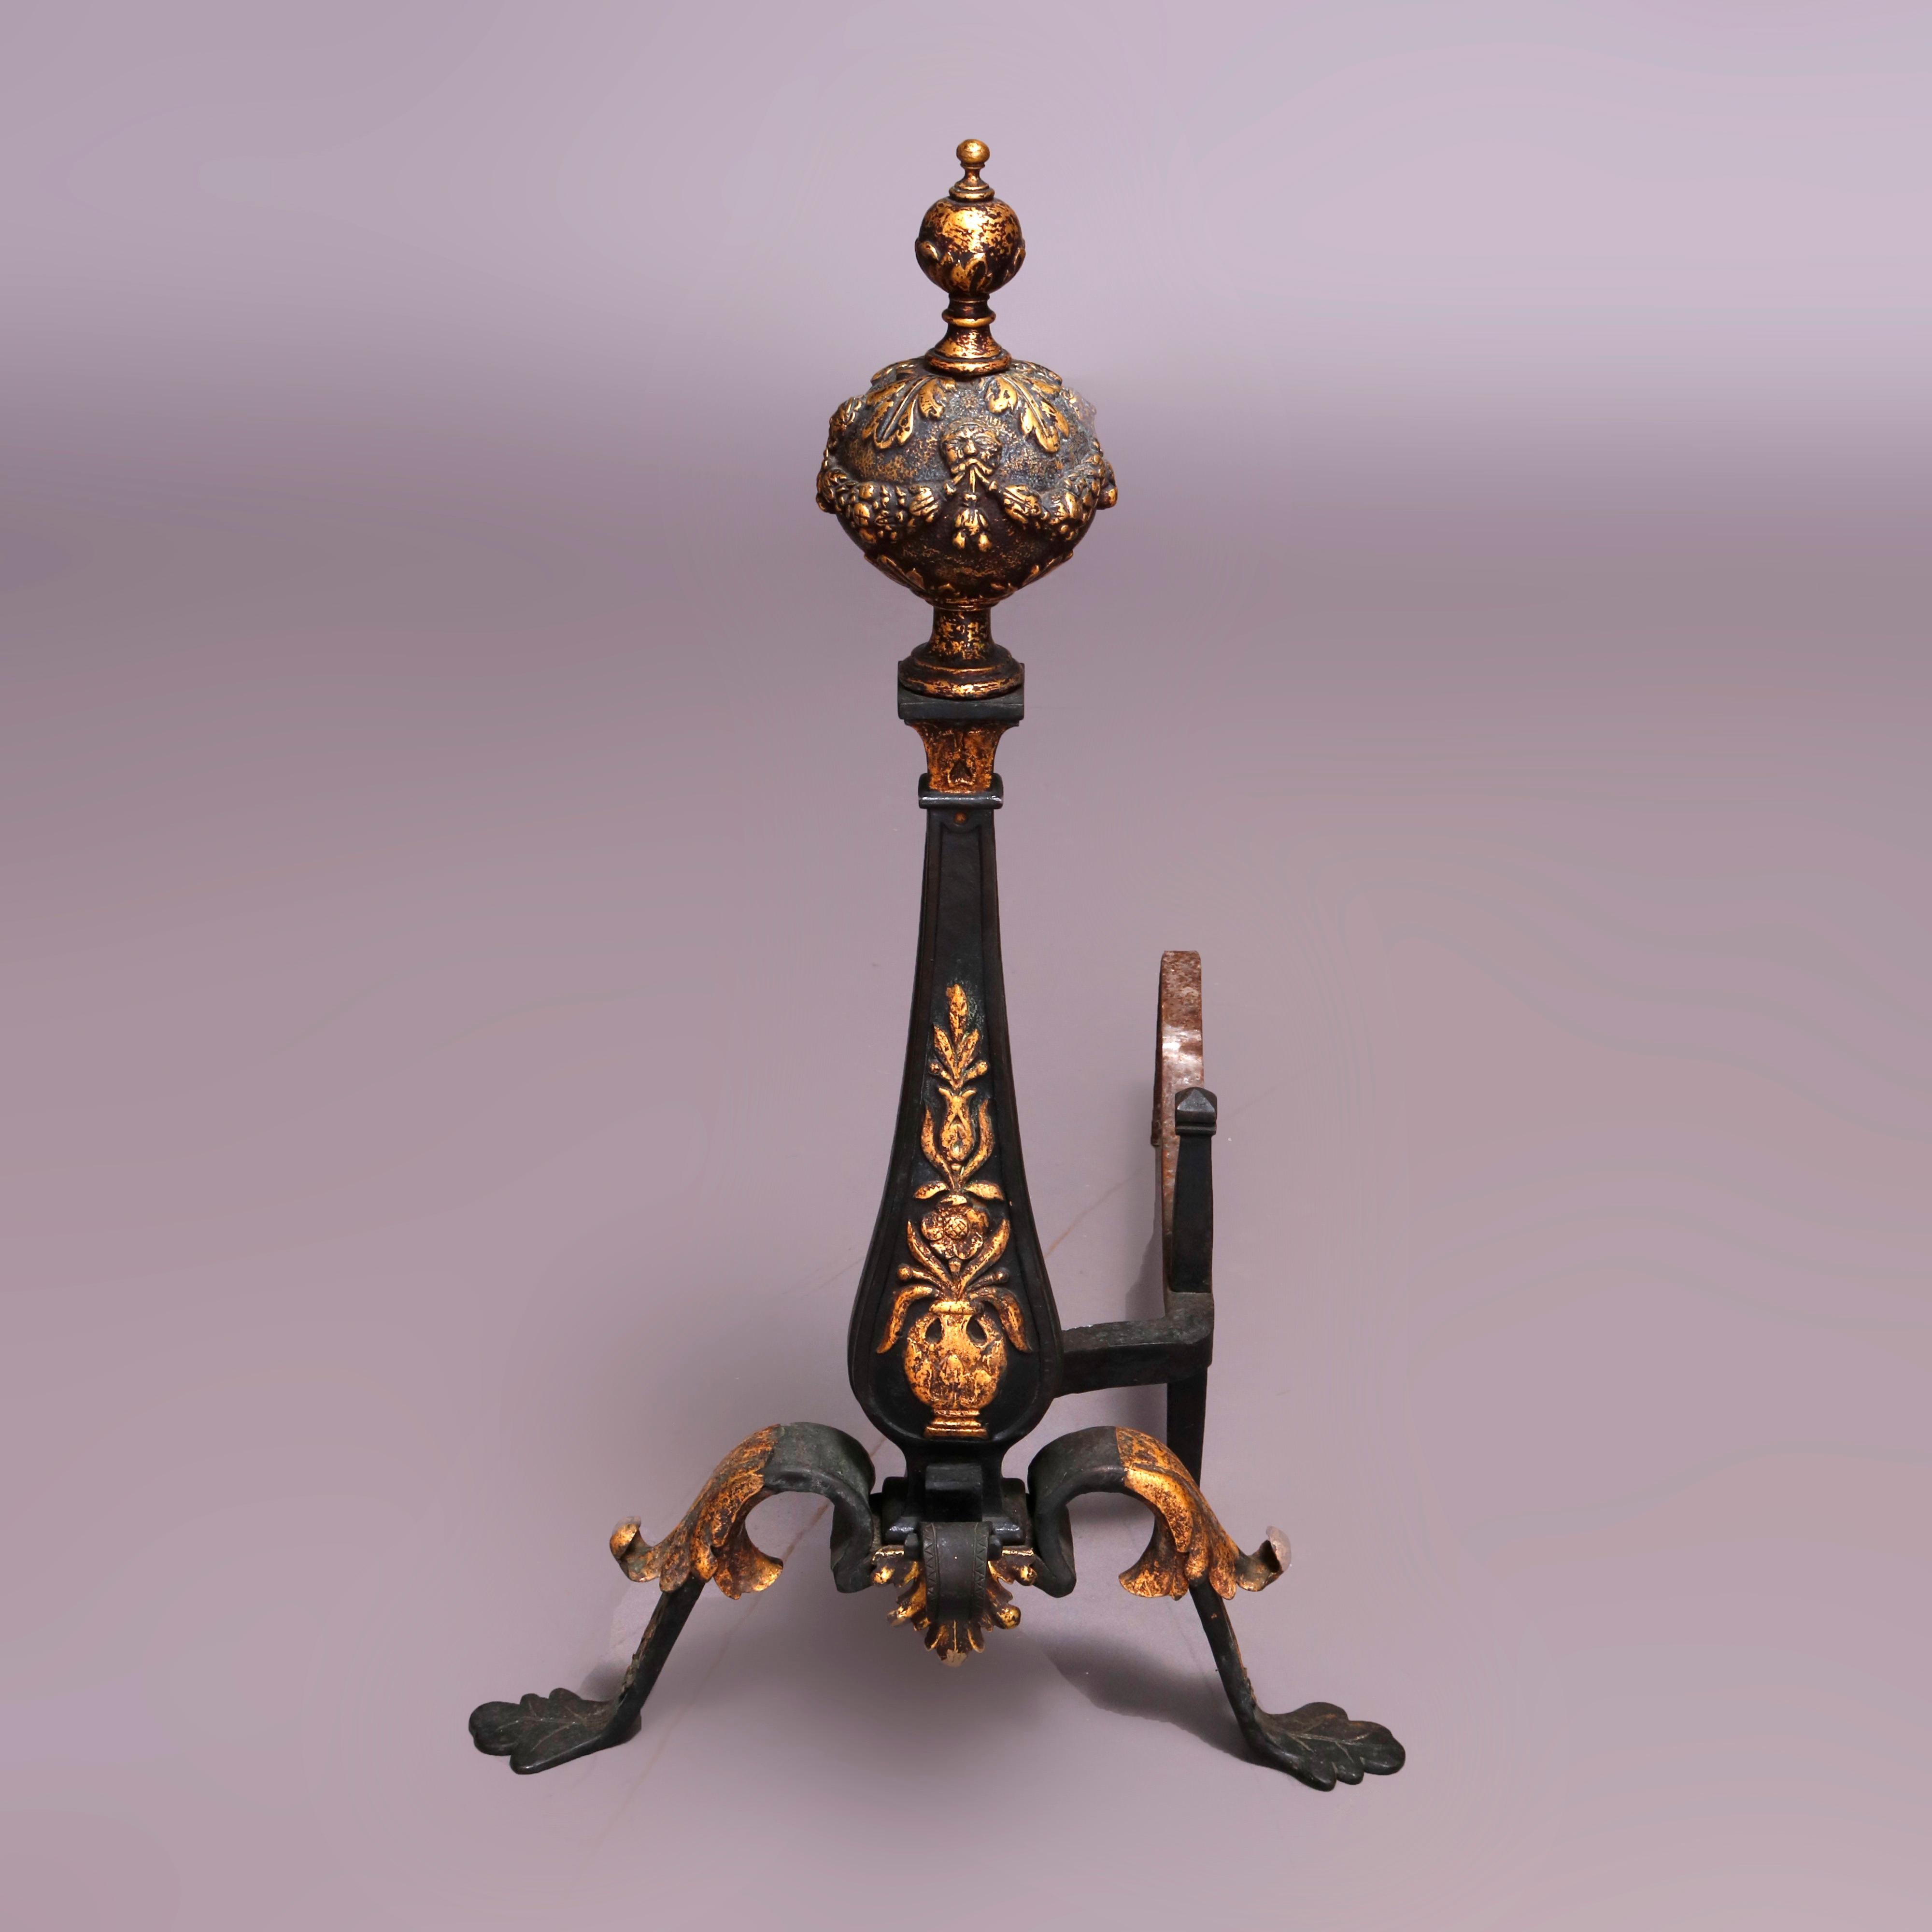 An antique and large French Louis XV fireplace set offers ebonized wrought iron andirons having stlized urn form with gilt panier de fleurs surmounted by high relief foliate ball finial and raised on legs with gilt acanthus knees and stylized paw